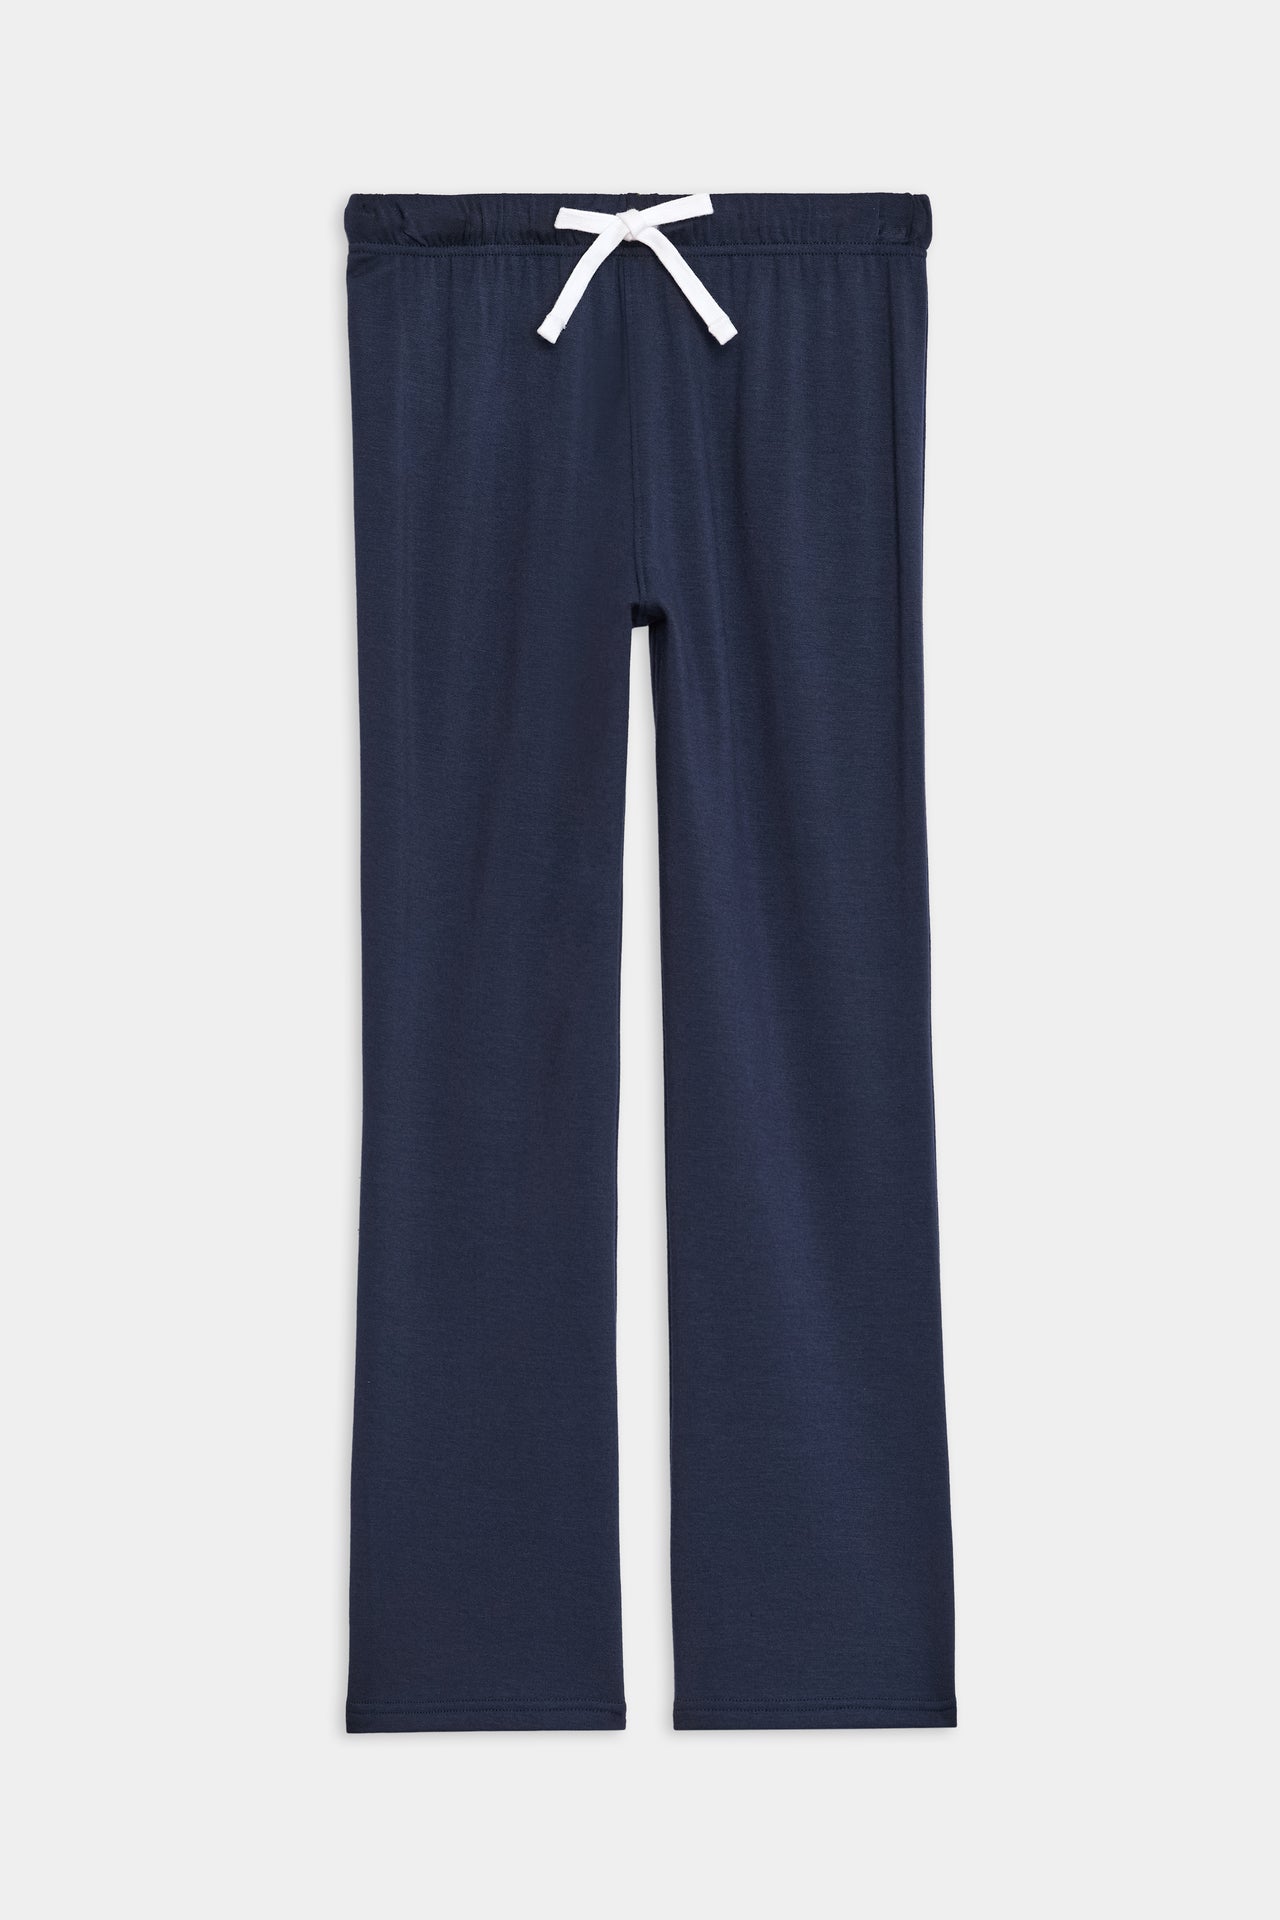 Flat view of dark blue cropped sweatpants with white string along the waistband